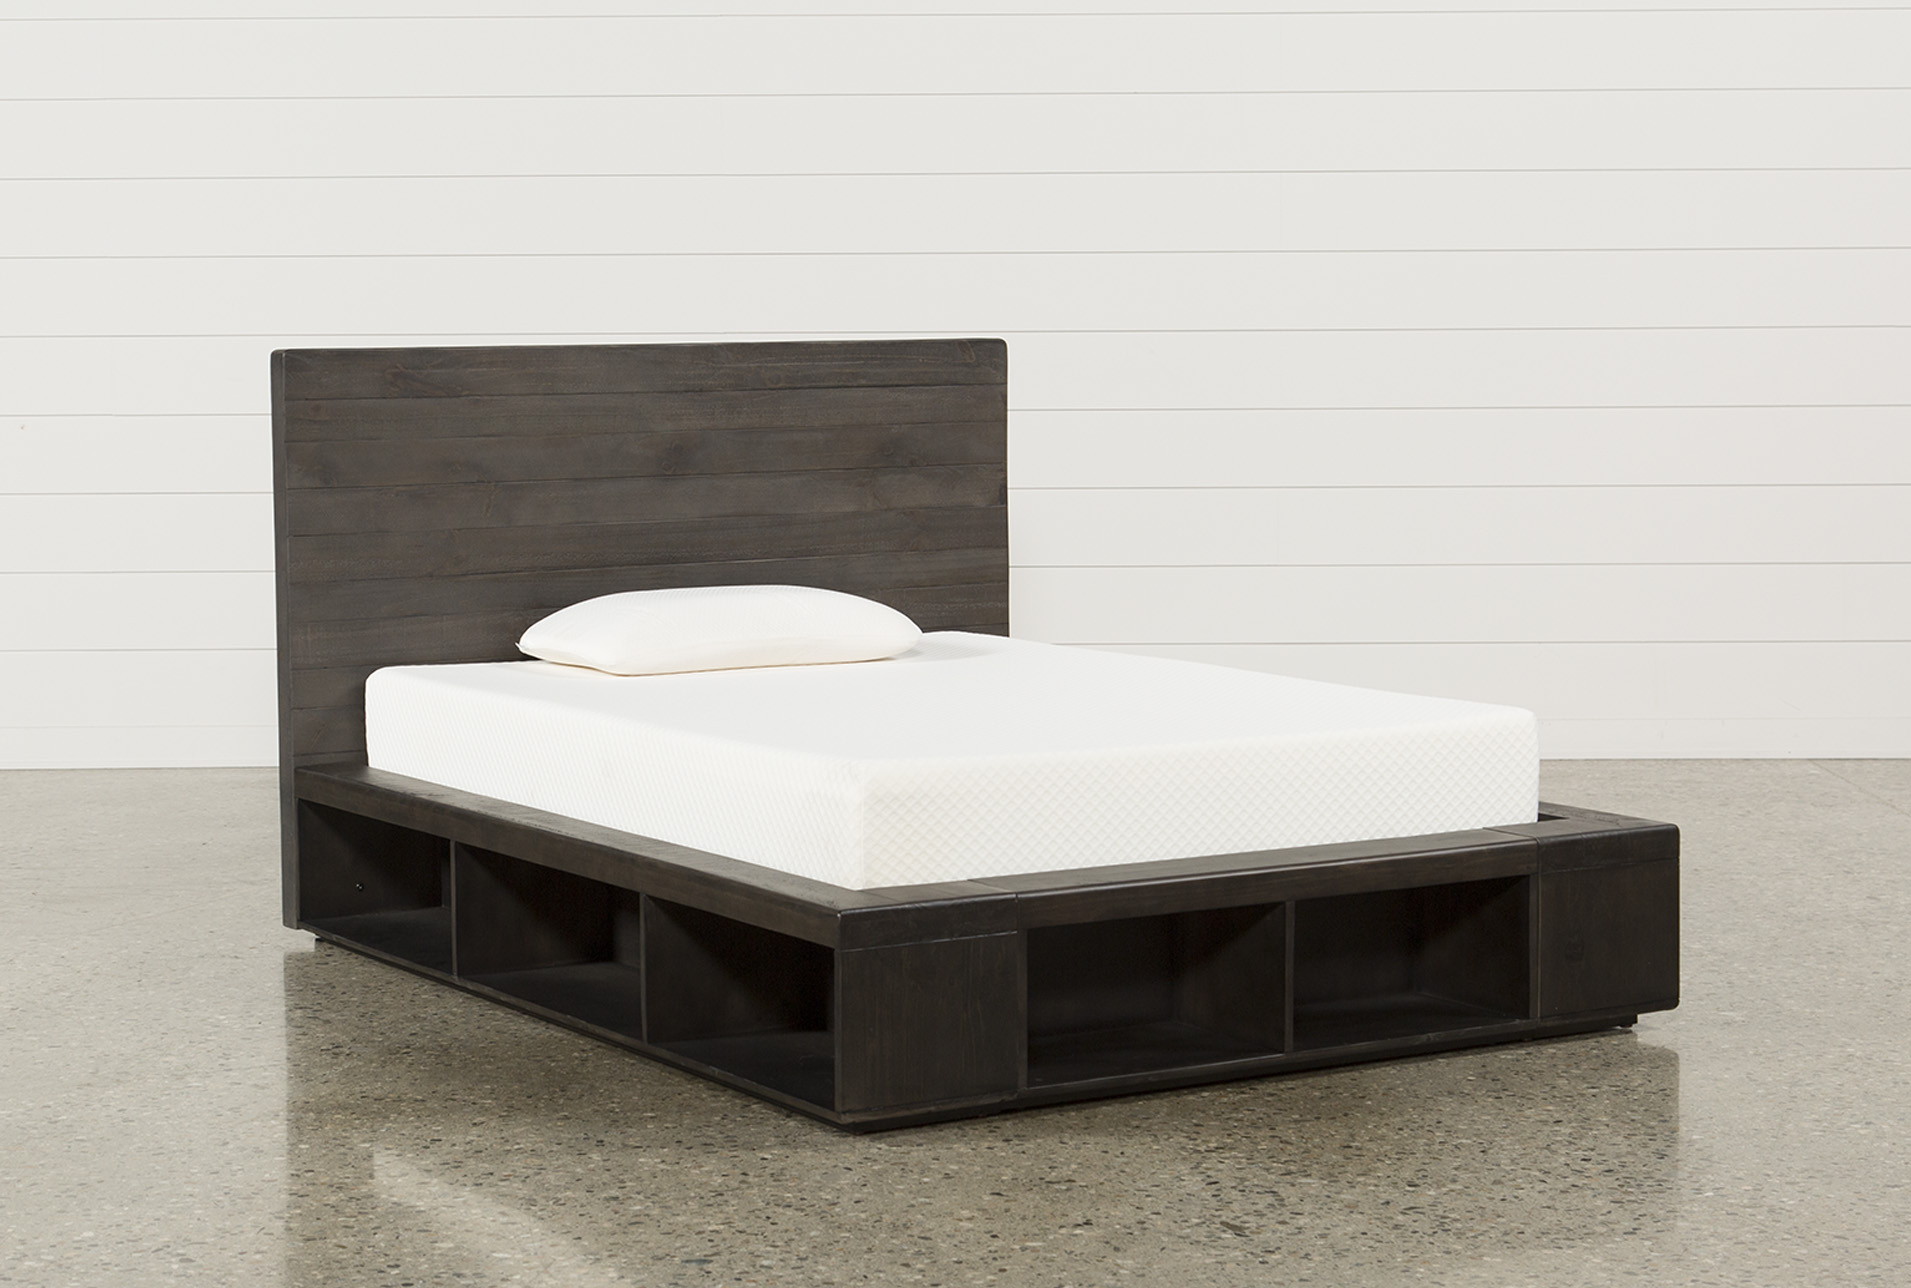 Dylan Full Platform Bed (Qty: 1) has been successfully added to your Cart.